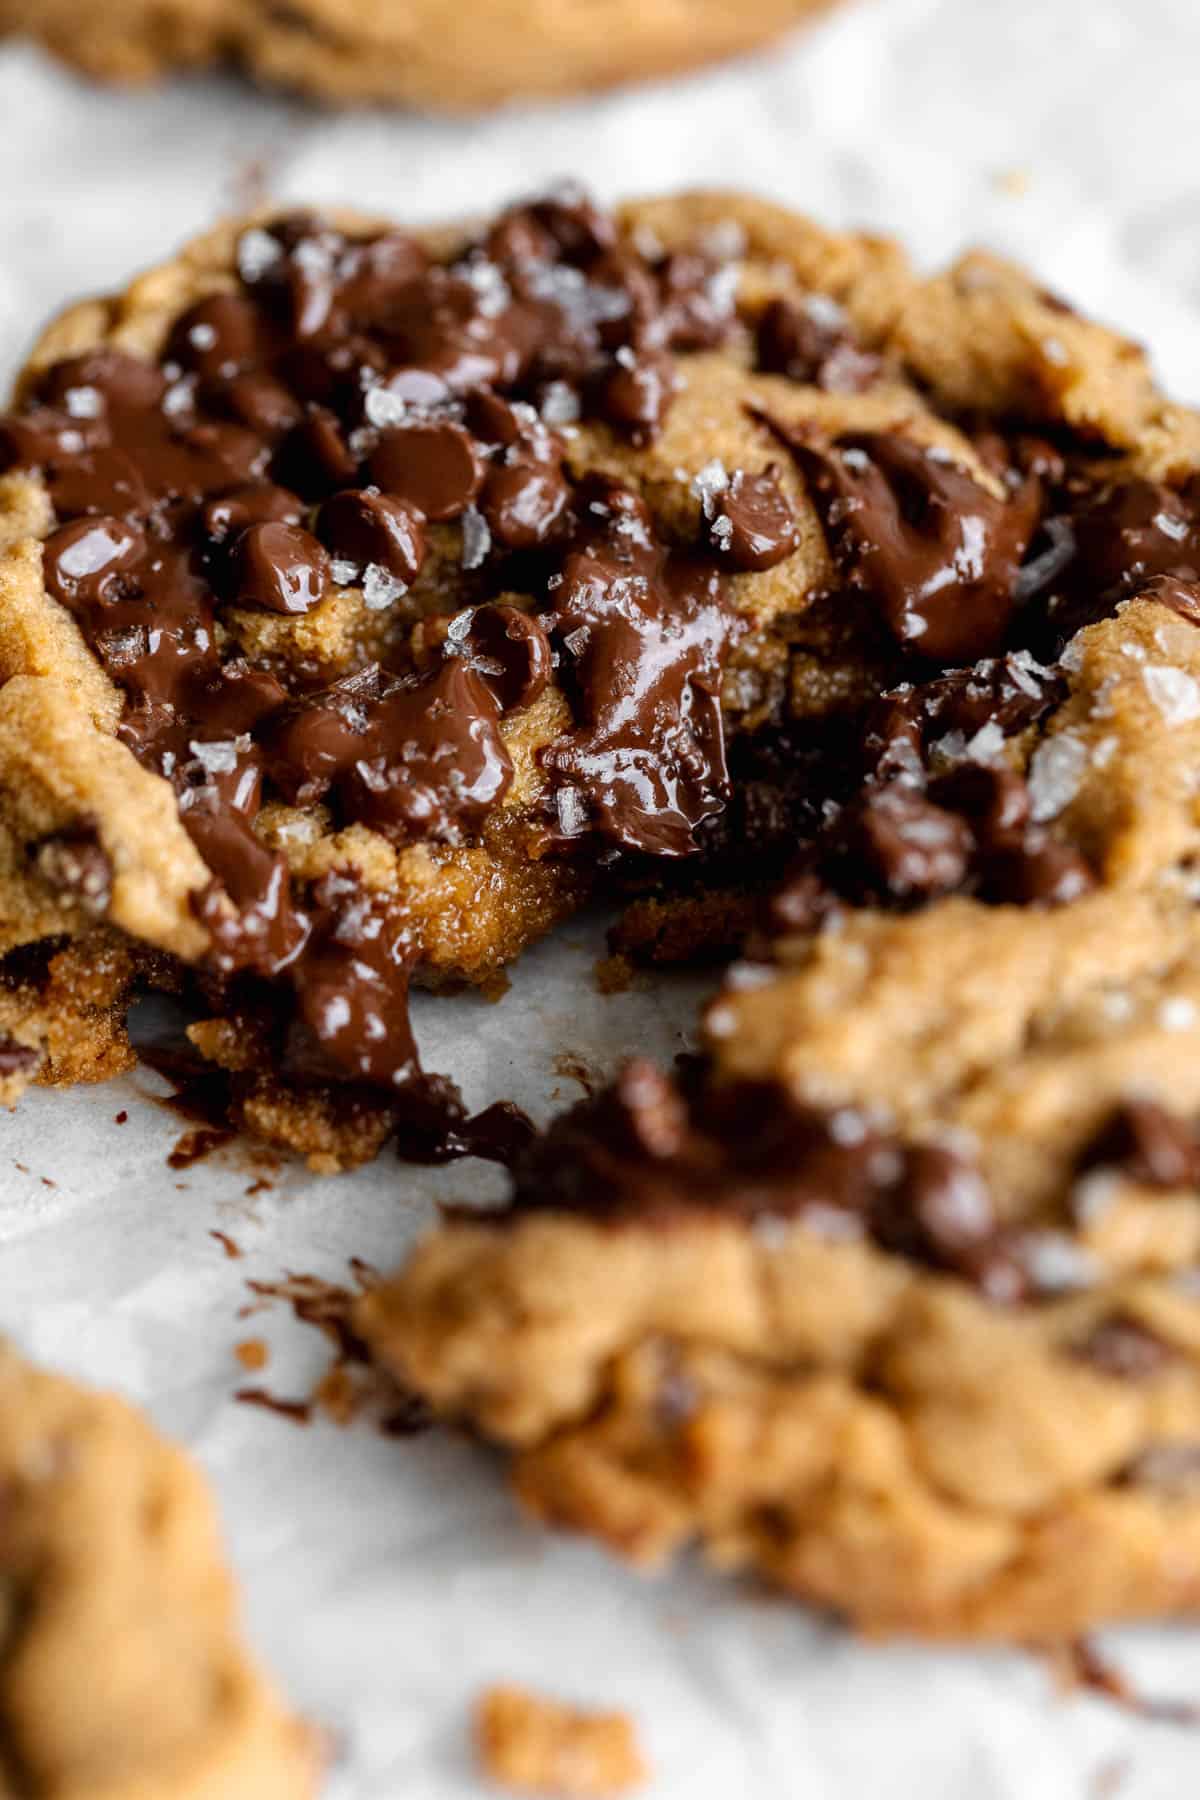 gluten free peanut butter chocolate chip cookie ripped in half to show melted chocolate